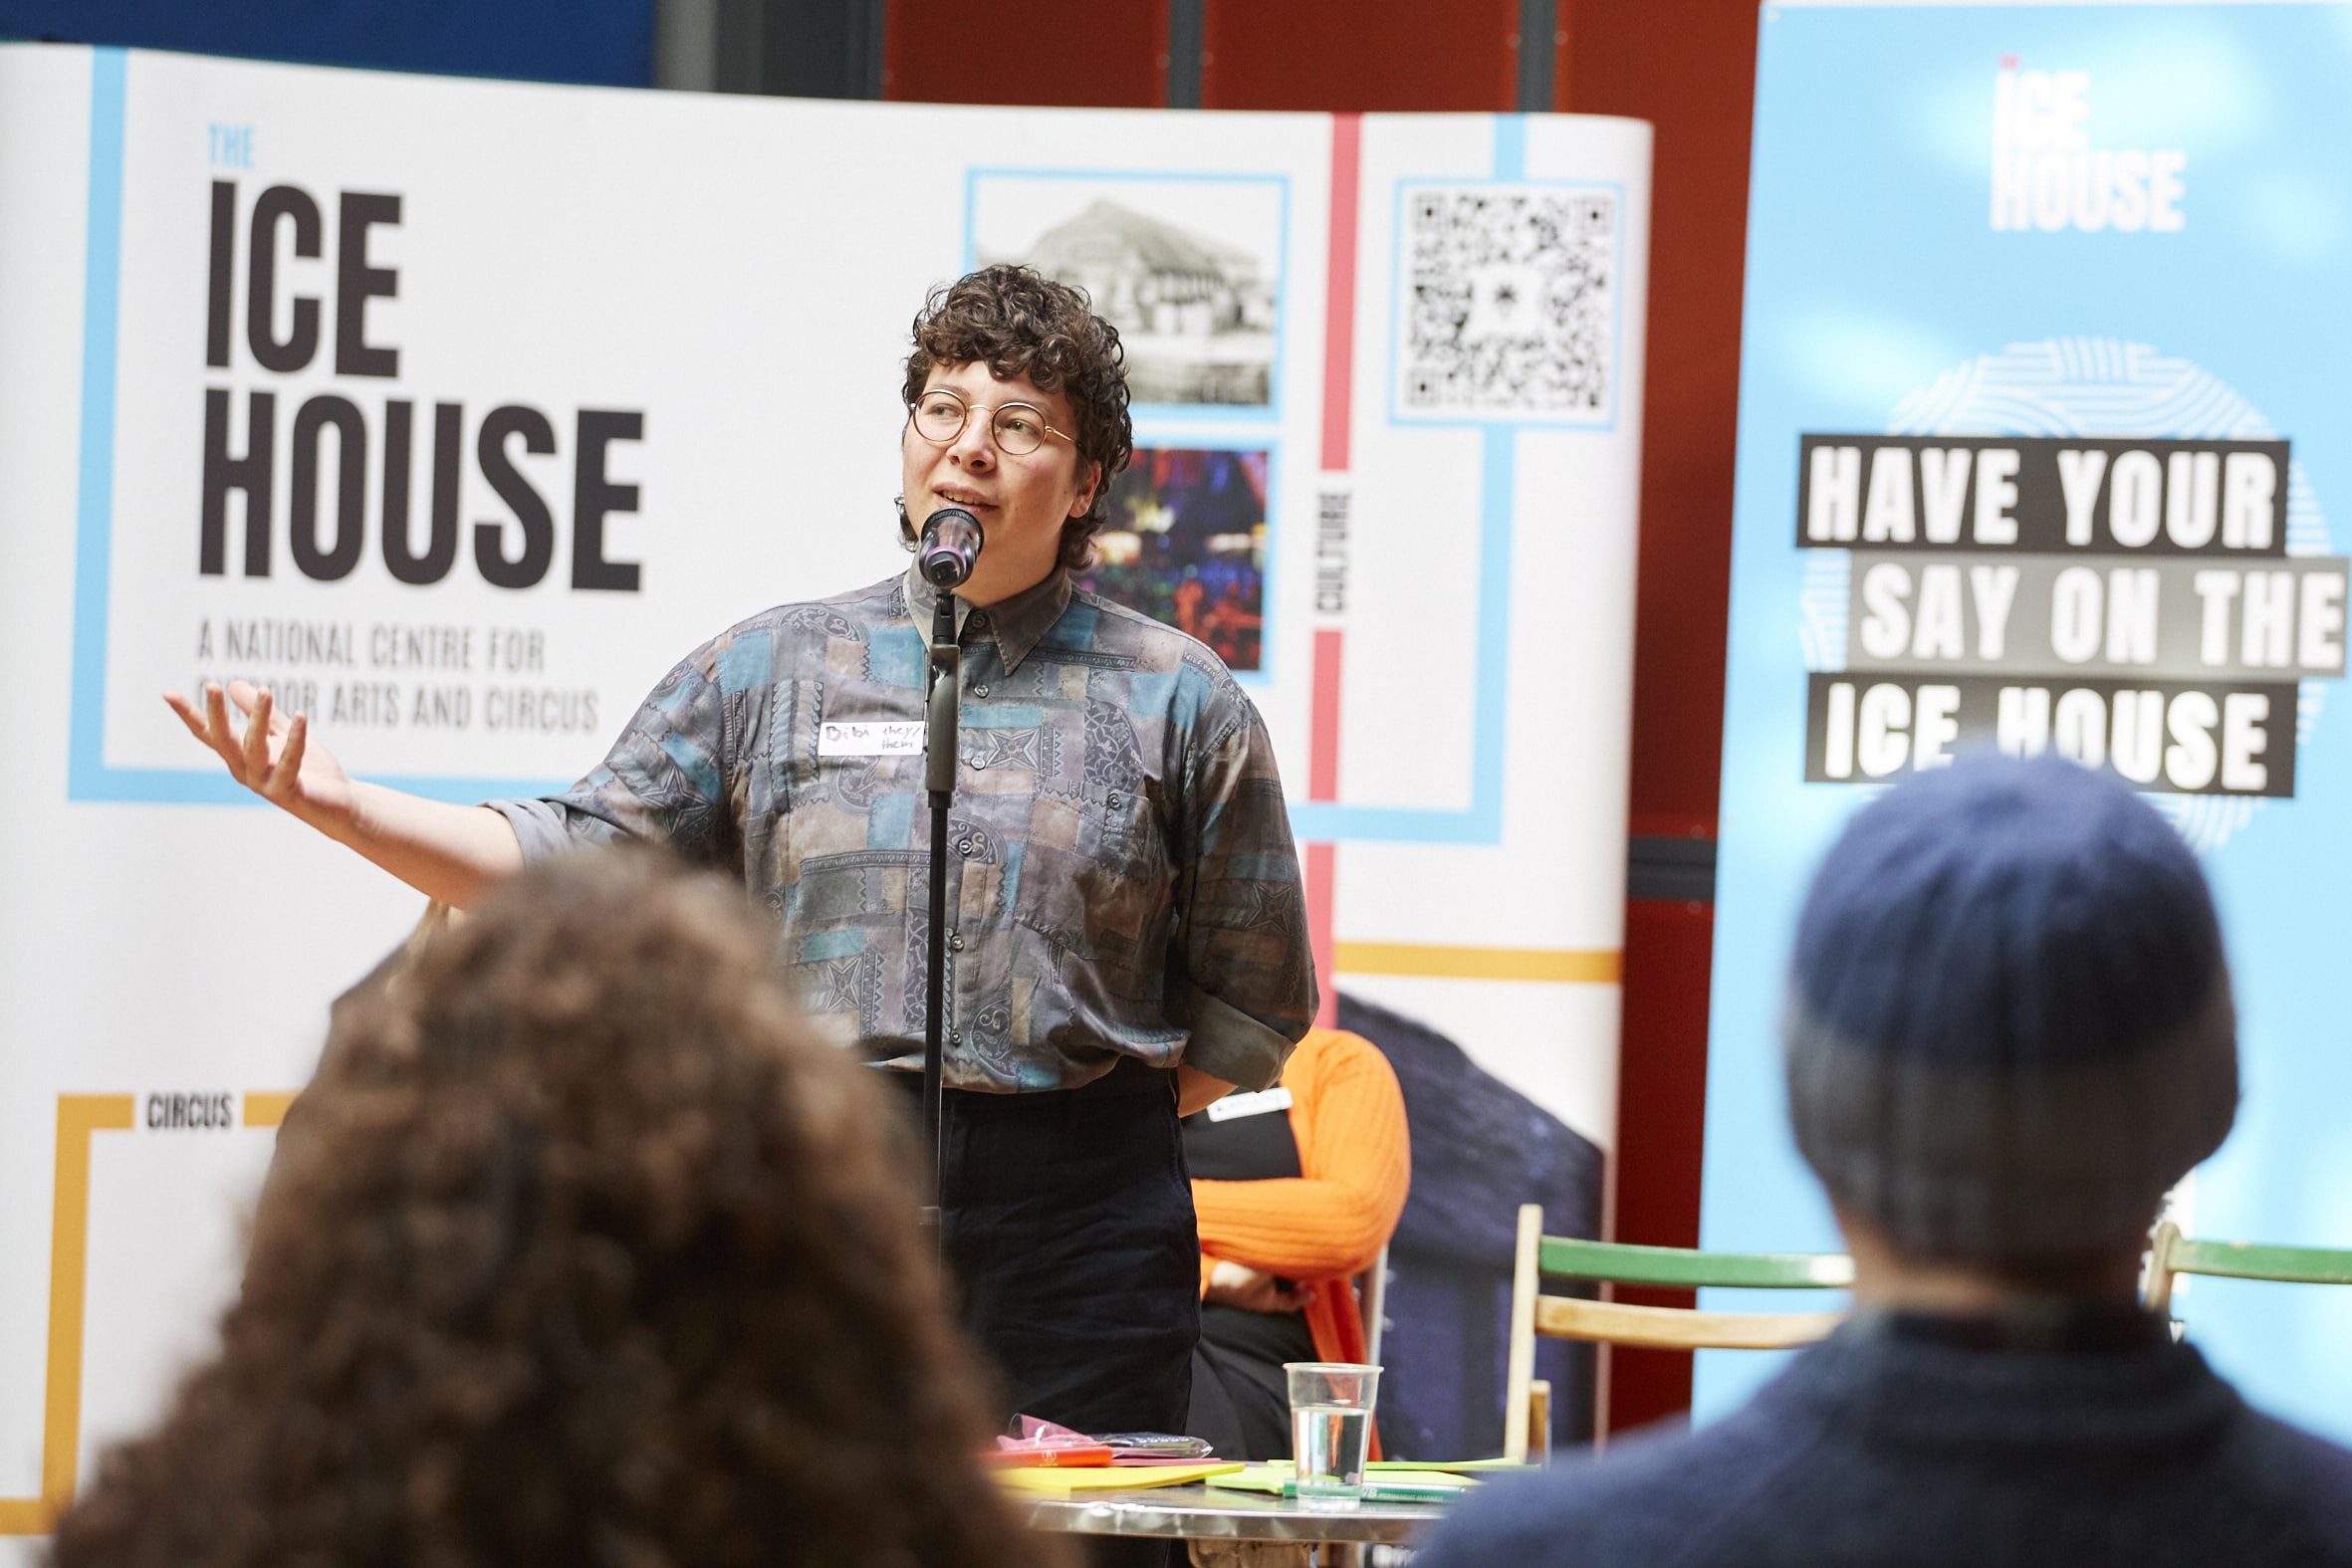 Person addressing an audience at The Drill House with The Ice House banner in the background